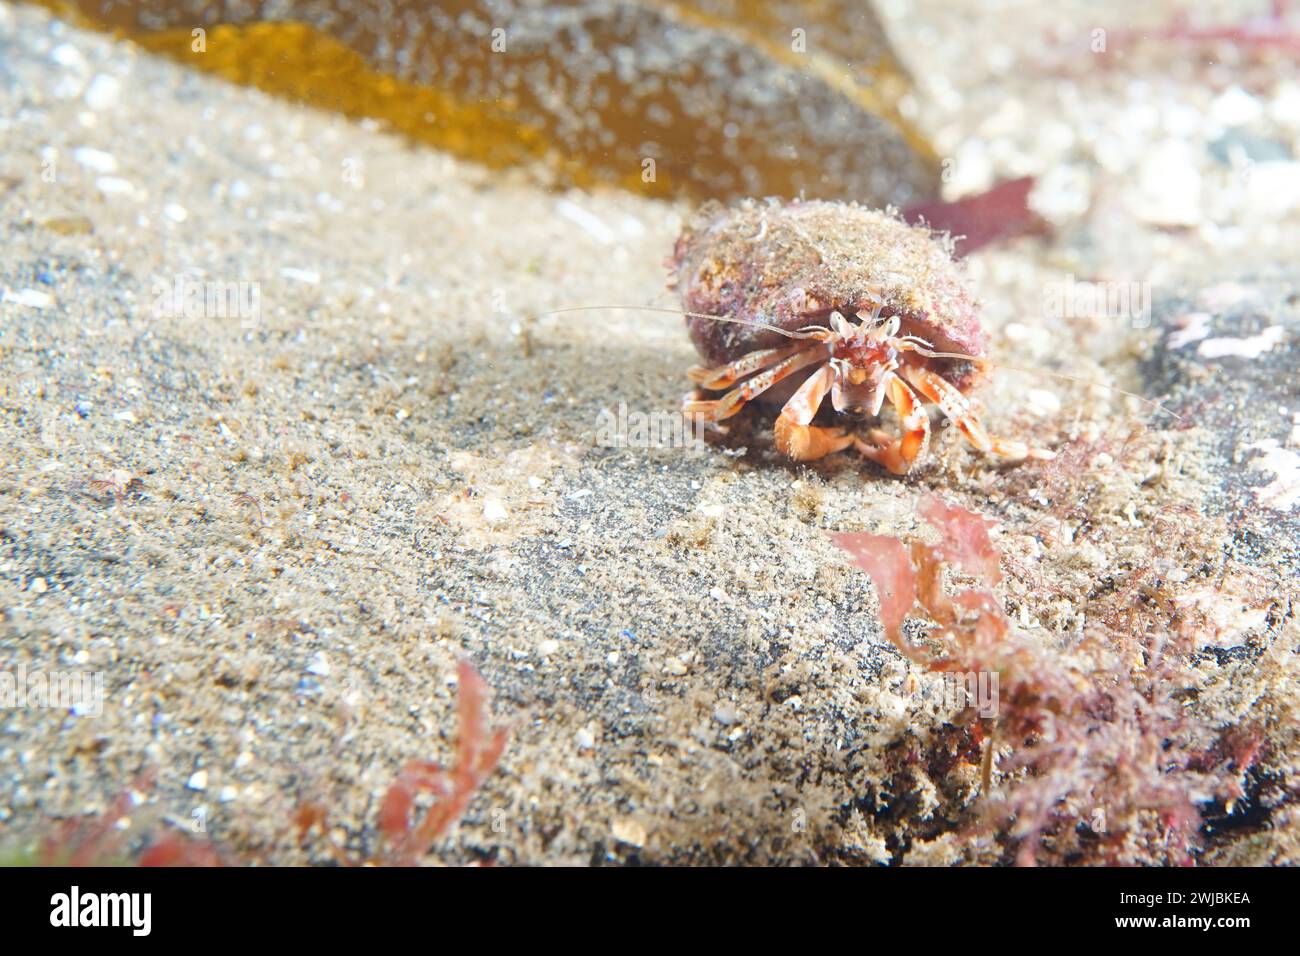 A hermit crab sitting on a rock in the north sea. The hermit crab is looking at the photographer and has its claws tucked under its shell. Stock Photo